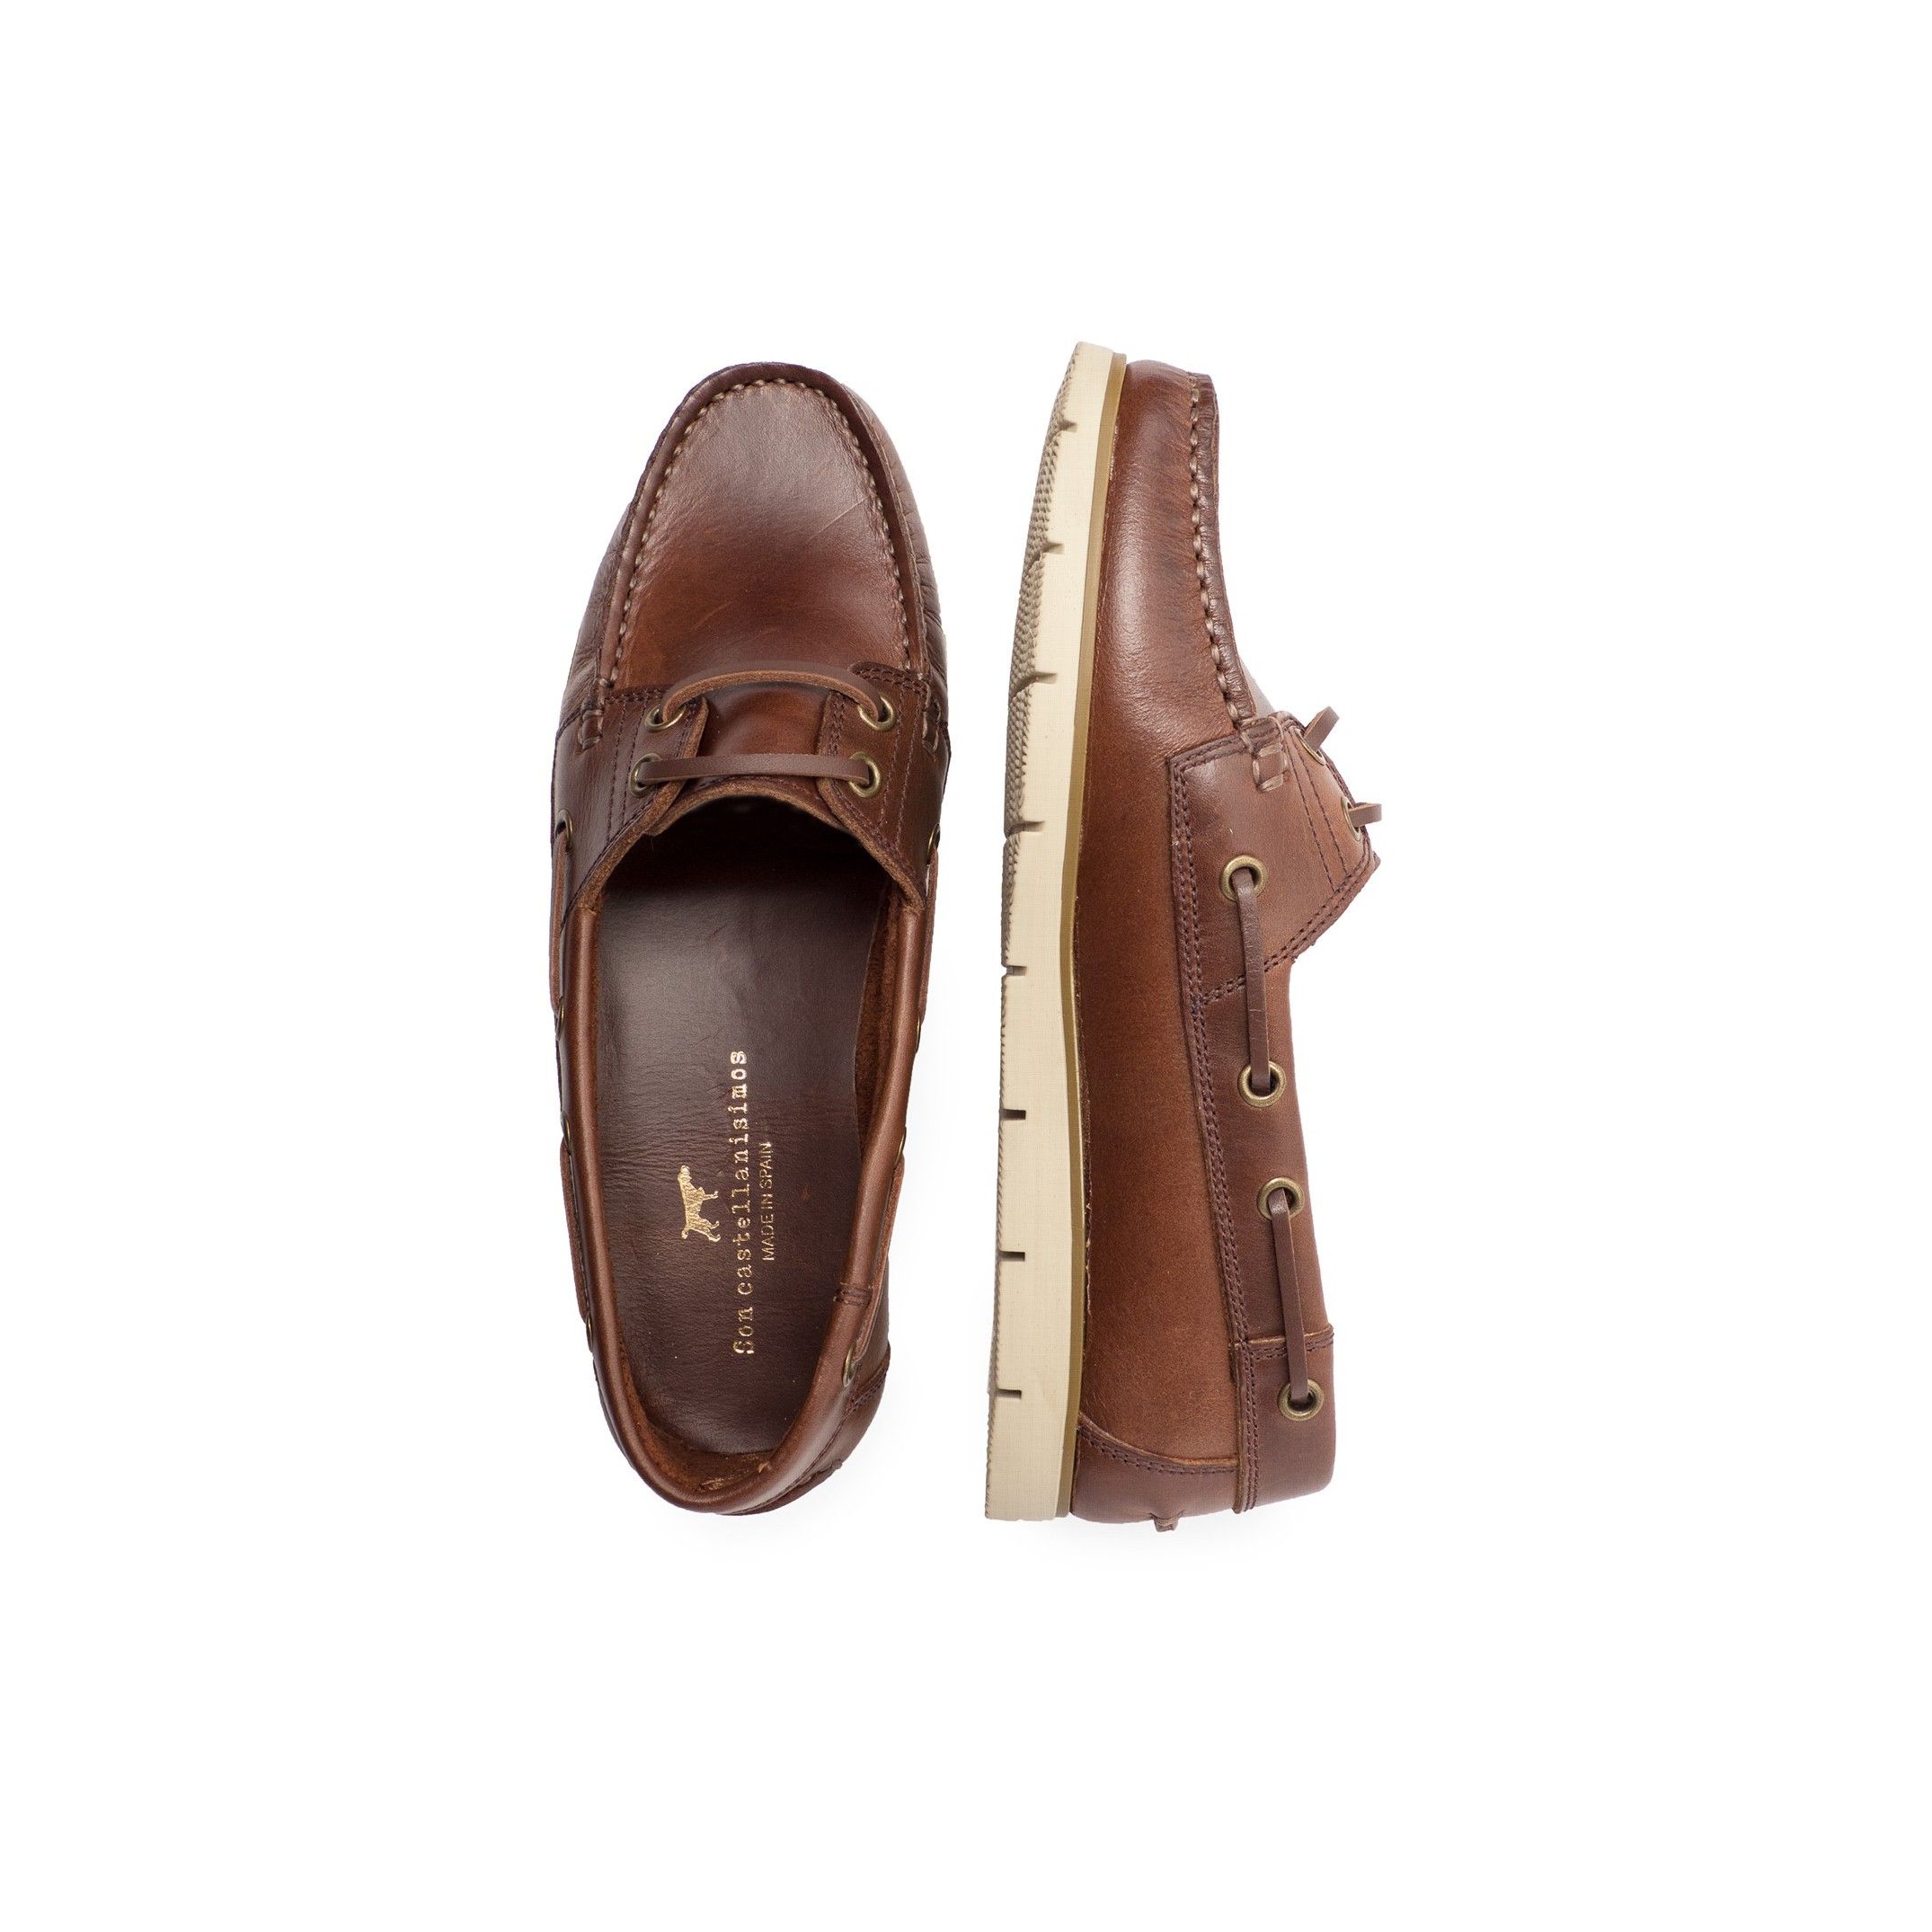 Leather boat shoes for women, by Son Castellanisimos. Upper made of cowhide leather. Leather laces closure. Forro interior y plantilla: 100% piel vacuno. Sole material: synthetic and non slip. Heel height: 1,5 cm. Designed and made in Spain.